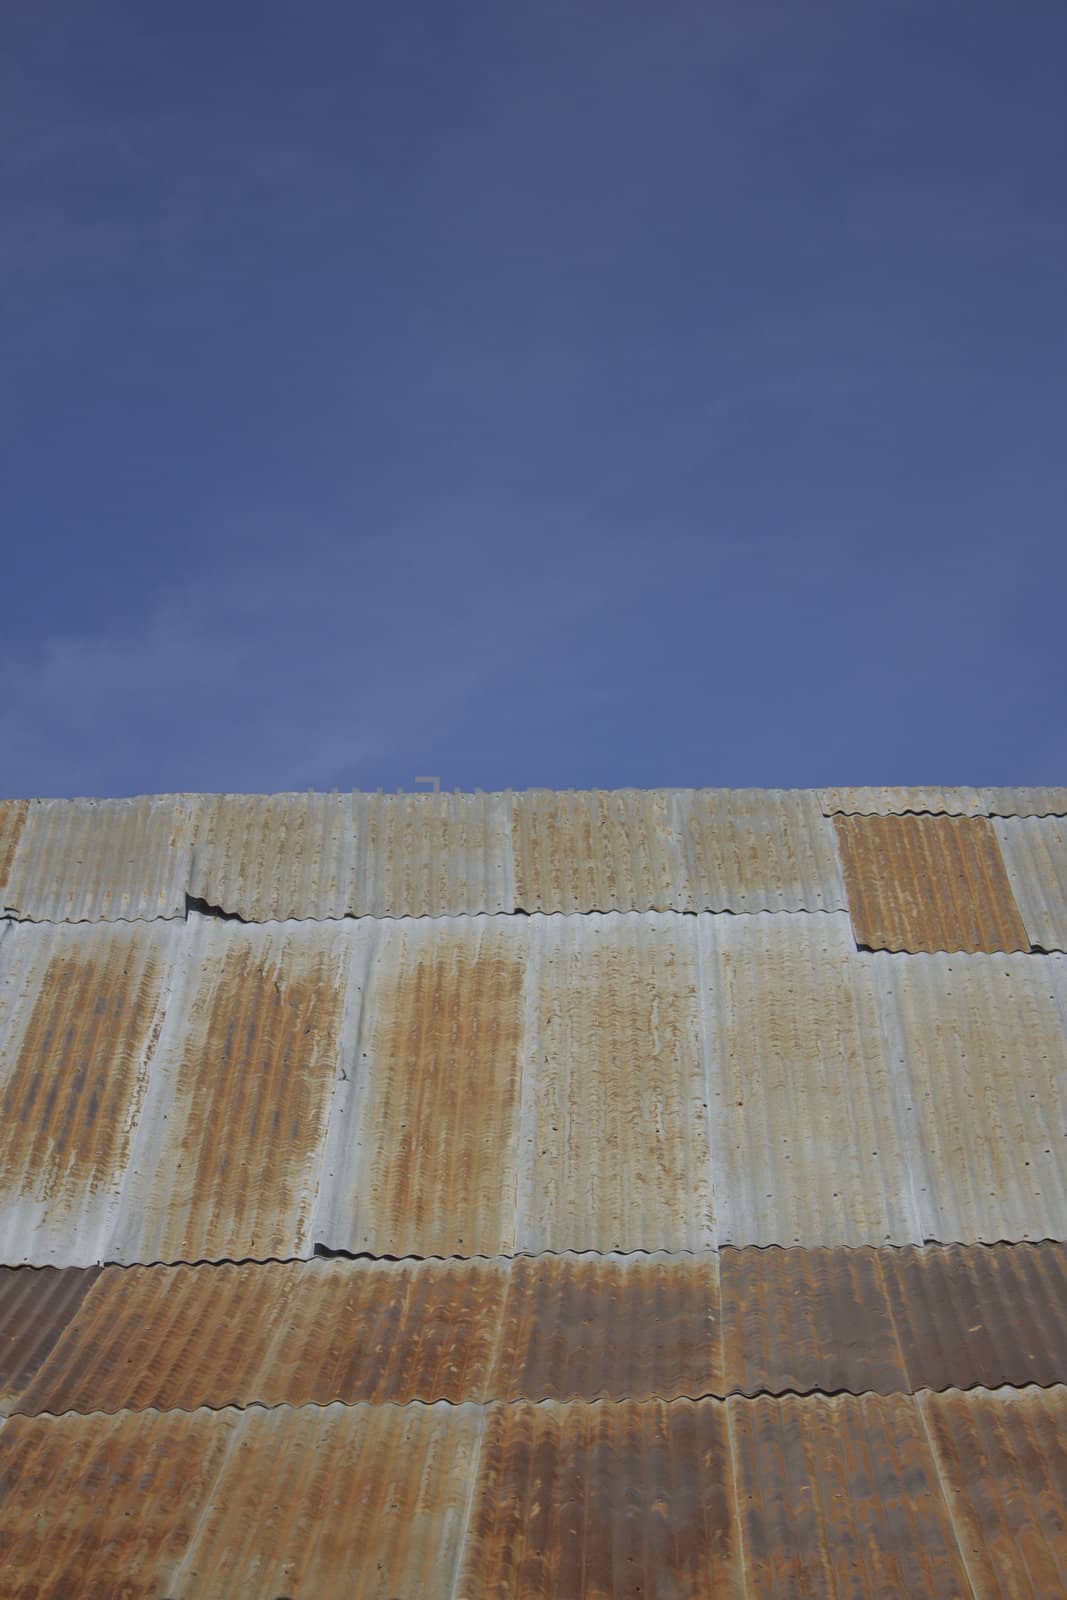 corrugated steel roofing  by jeremywhat